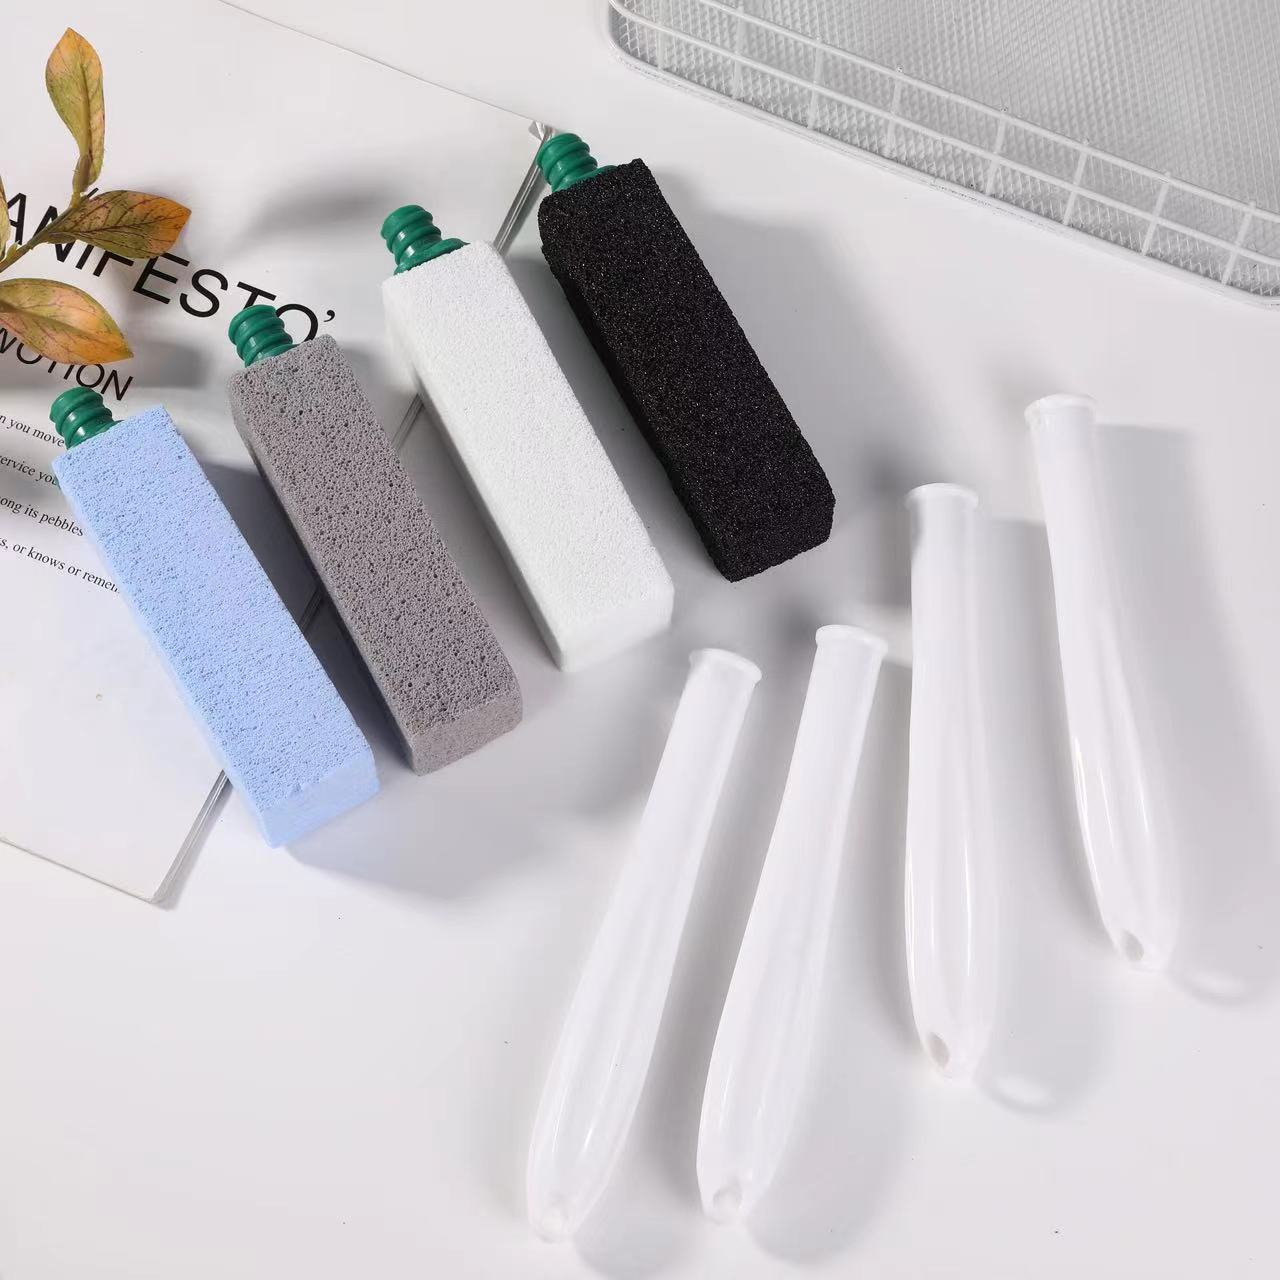 Replaceable Pumice Stone Brush Toilet Clean Brush Tool with Extra Long Handle For Cleaning